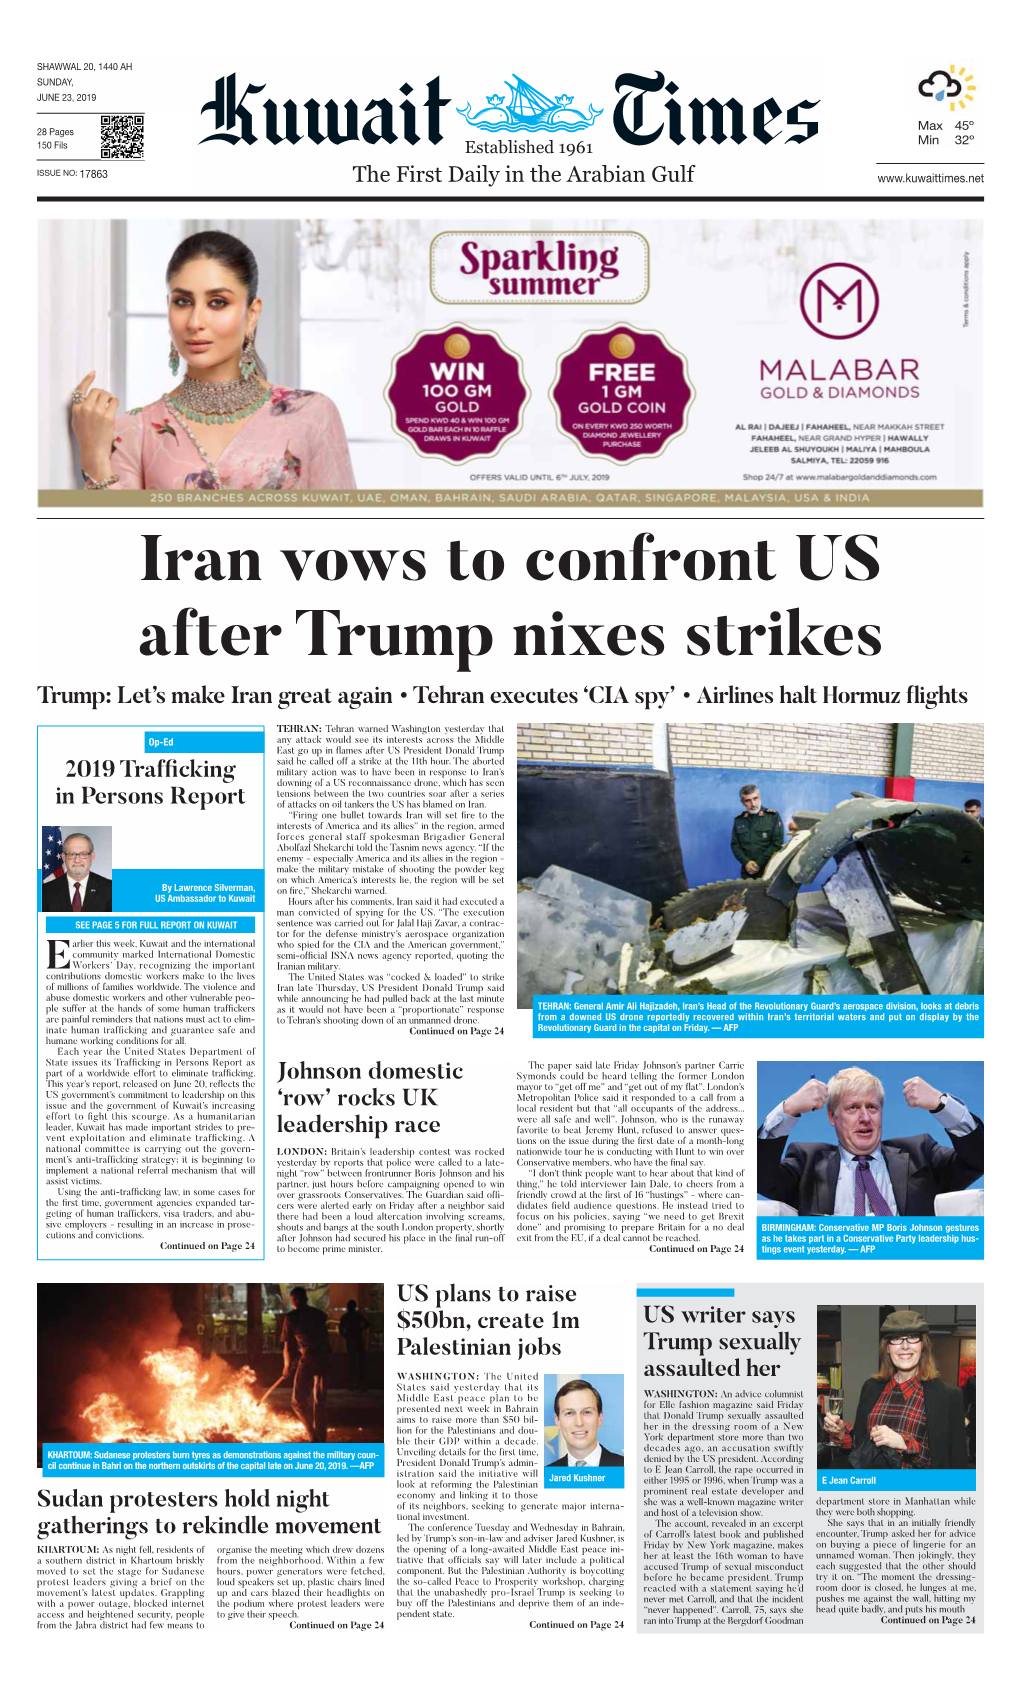 Iran Vows to Confront US After Trump Nixes Strikes